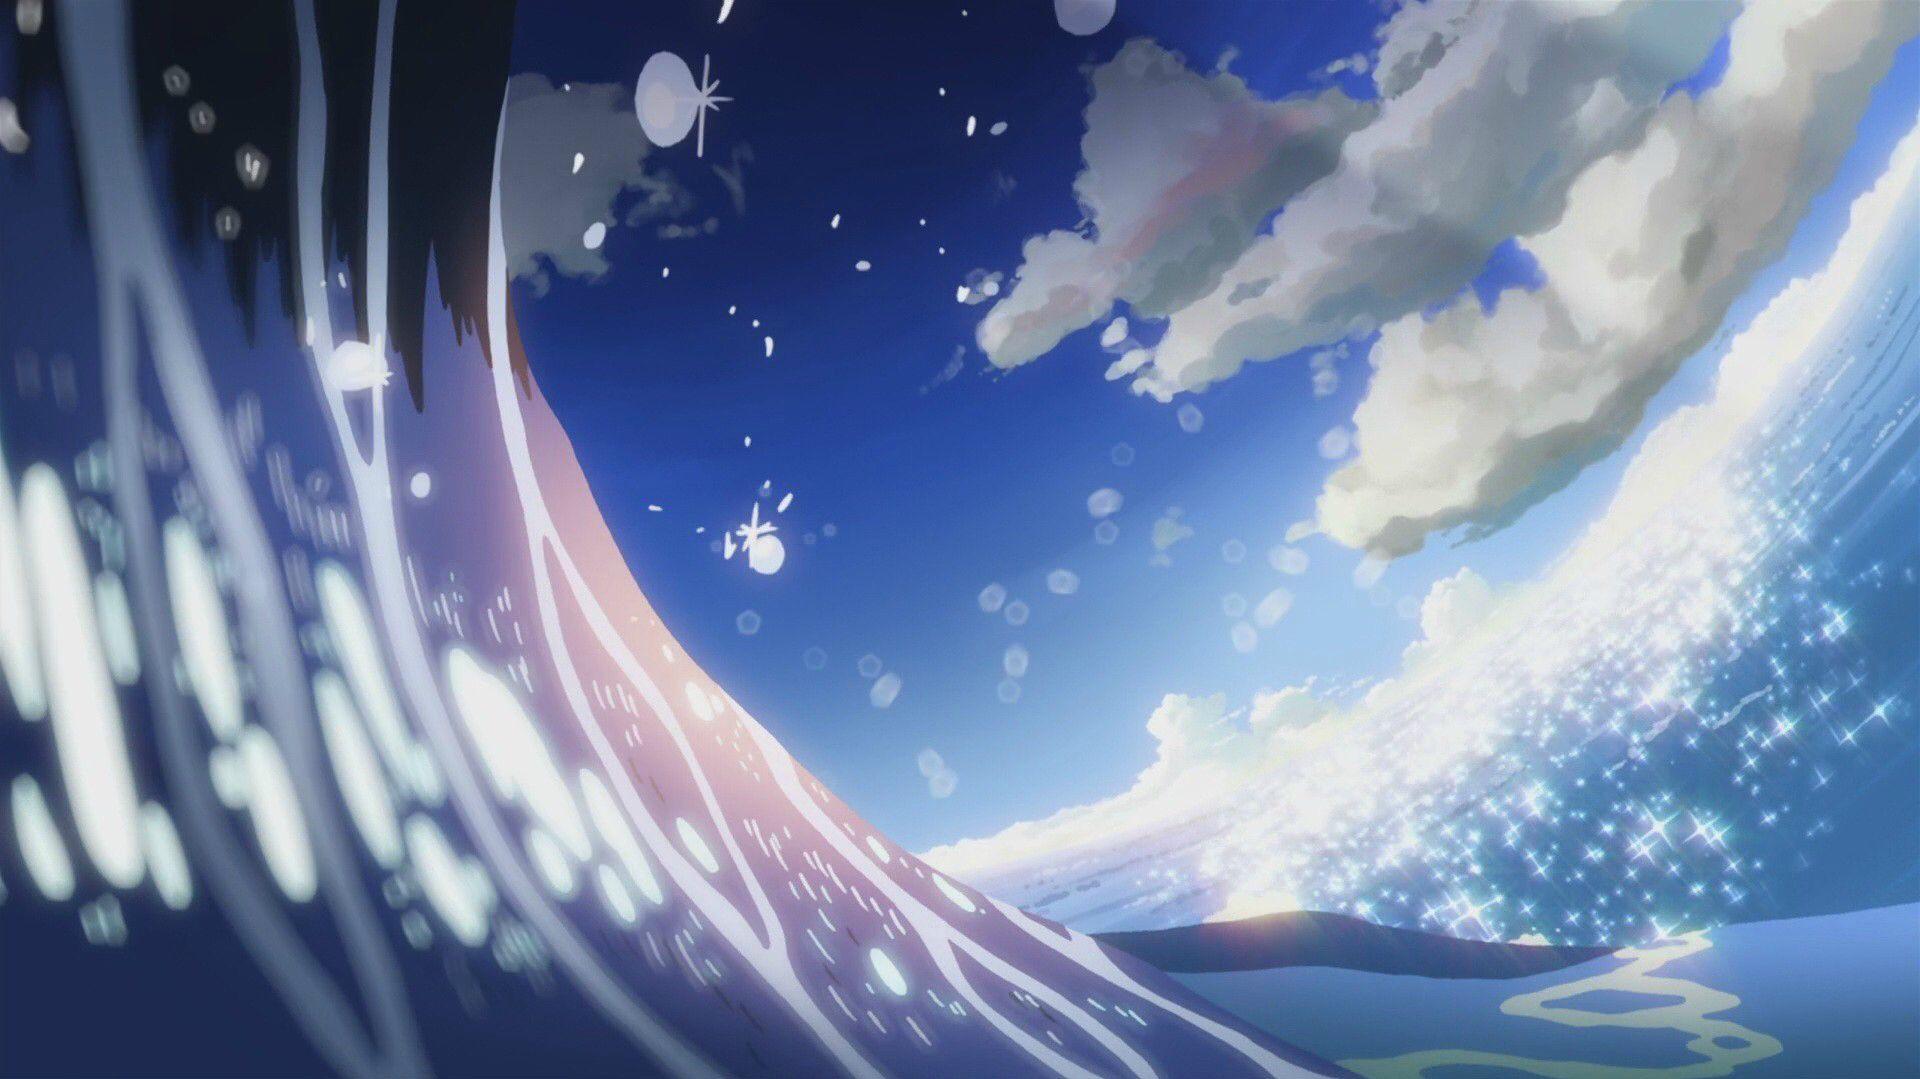 Anime Scenery Water Background